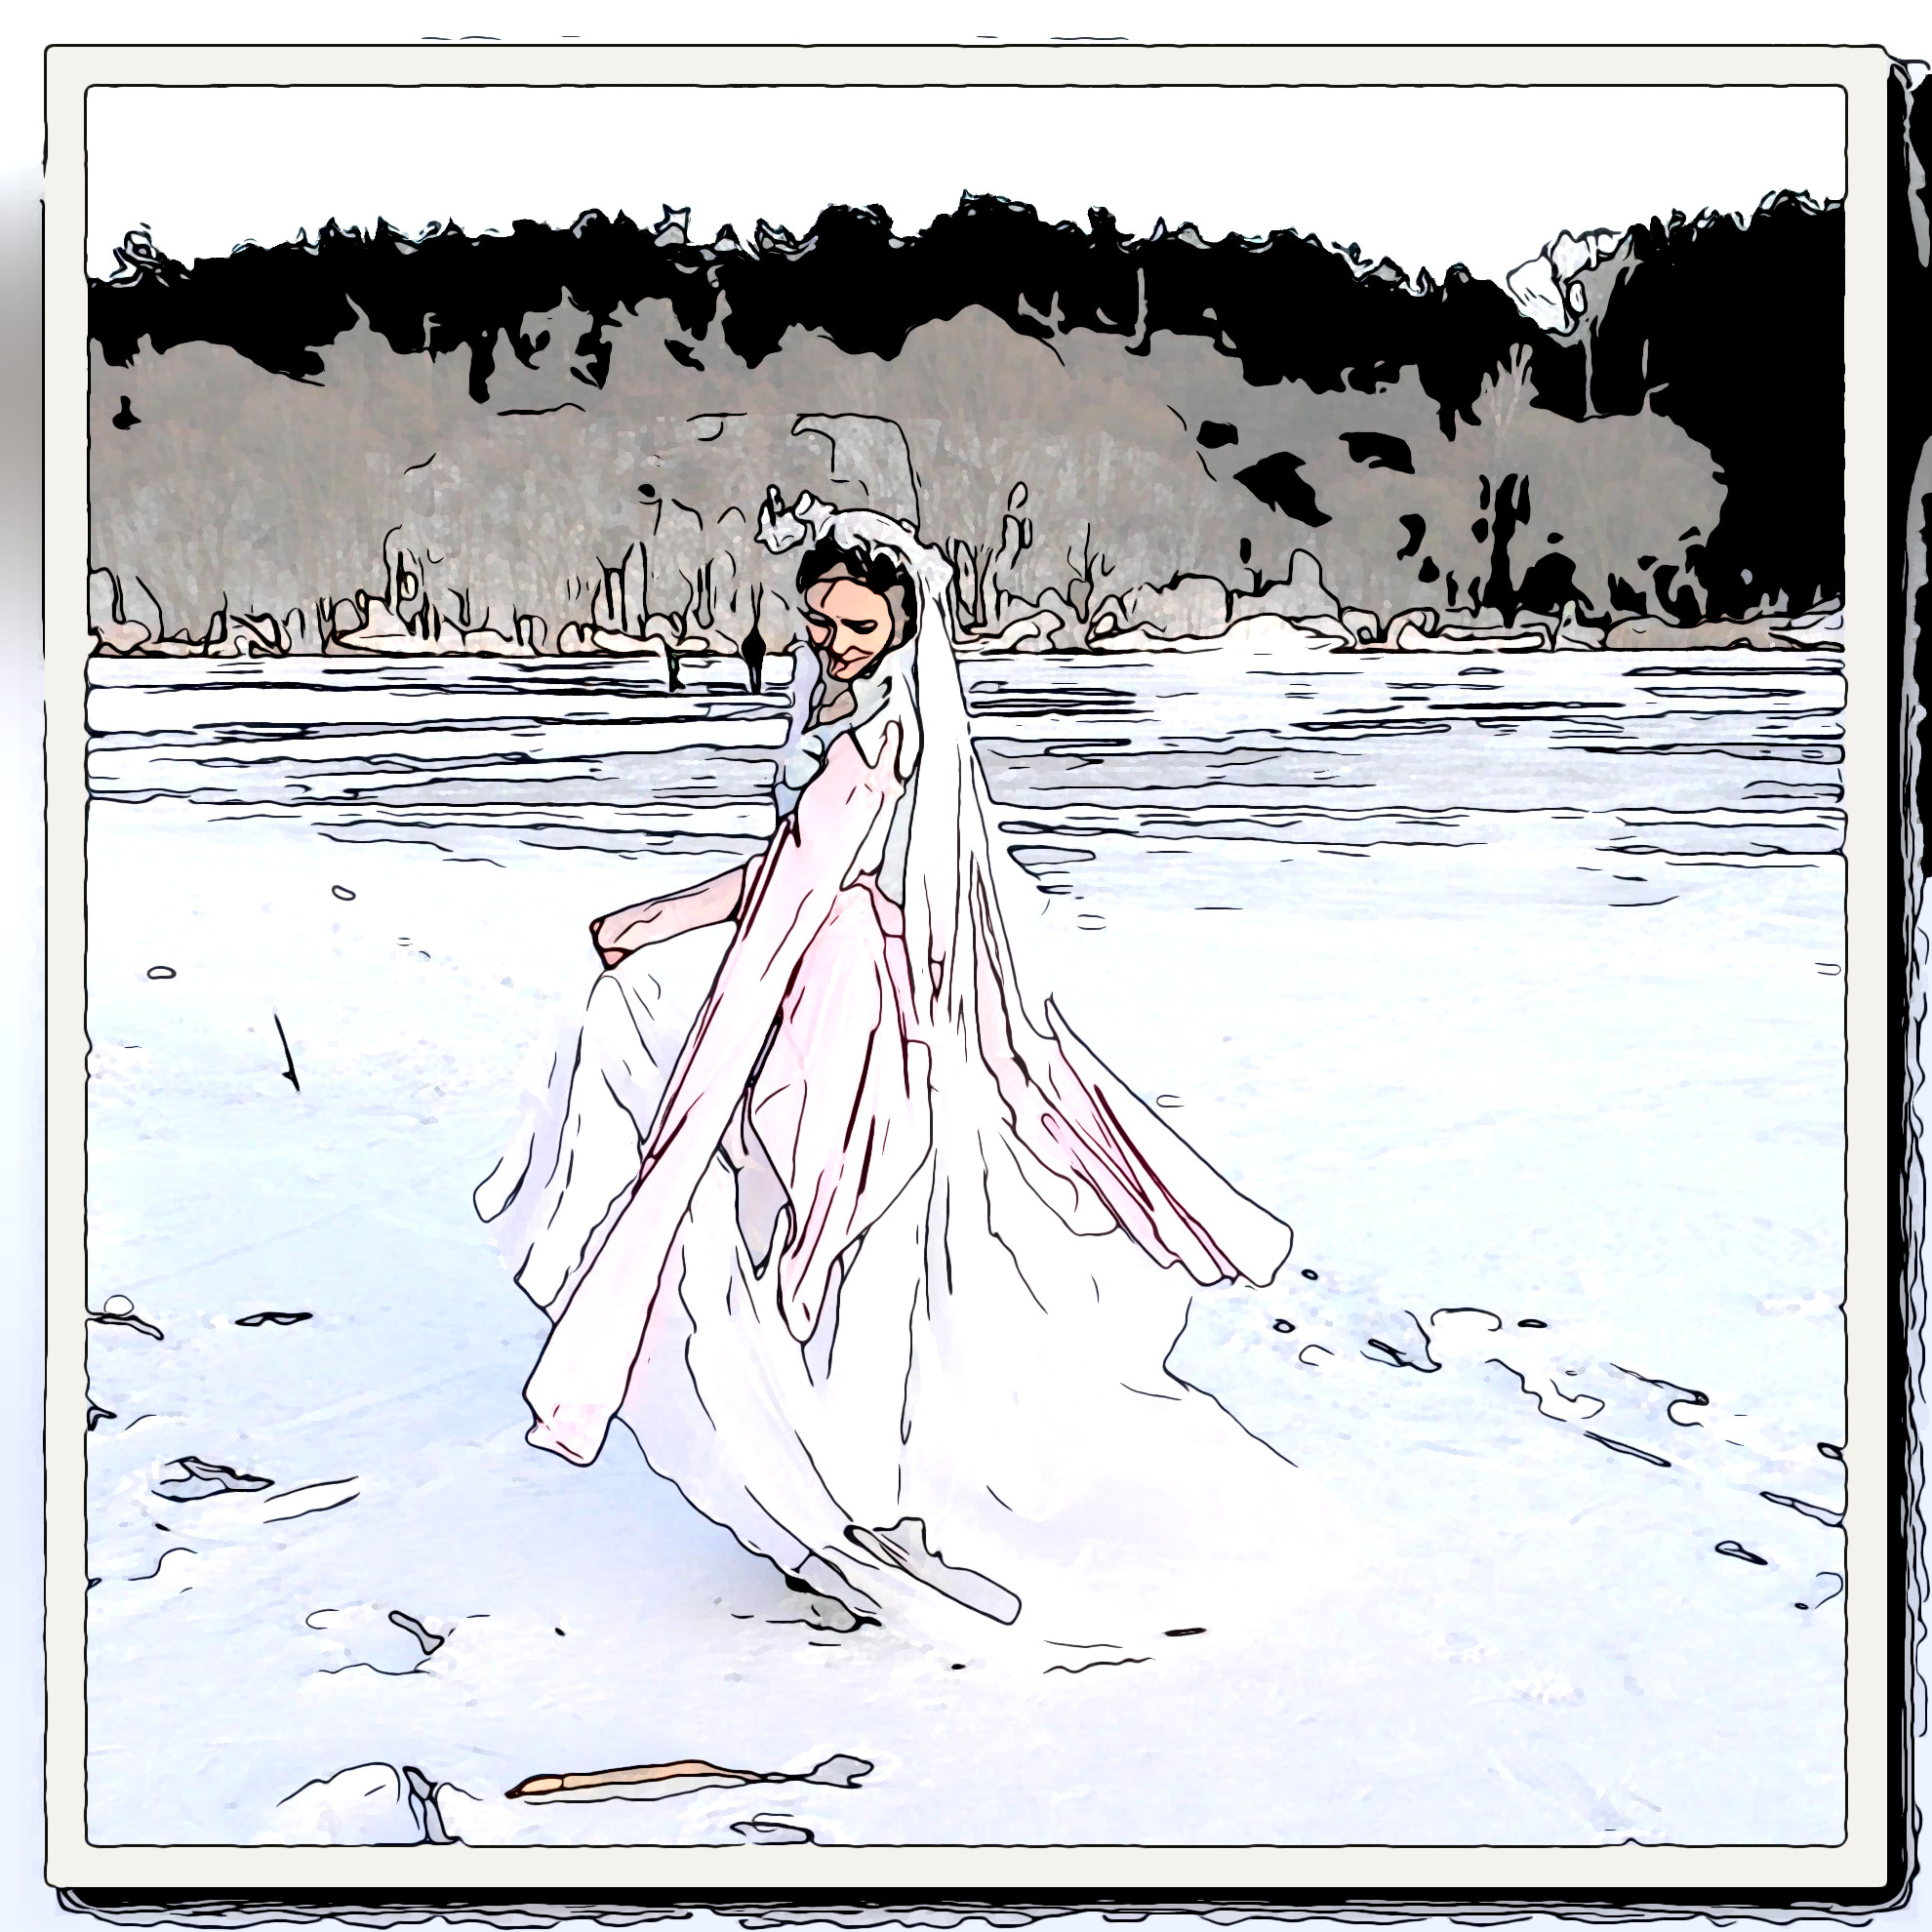 2023-05-28 08-59-21costume__winter_morning__by_aquilina108_dbl2s3l-fullview_portrait with a framed Artistic effect, style LineArt.jpg